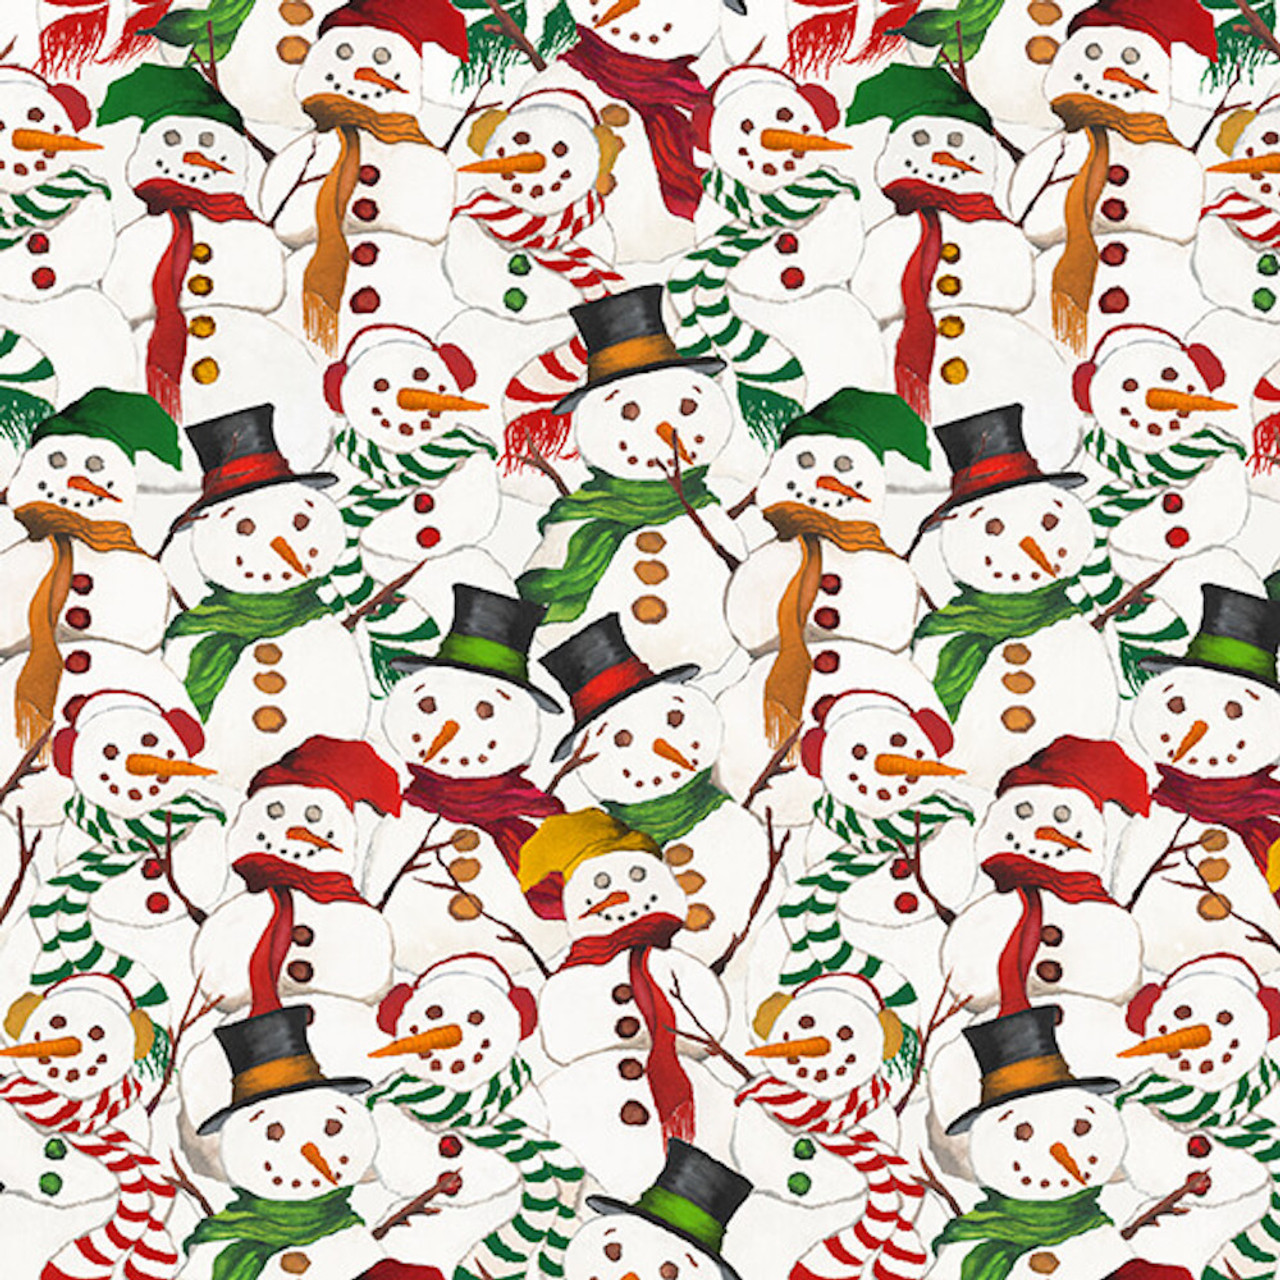 Blank Quilting Wintry Mix Snowman Collage Red Cotton Fabric By The Yard